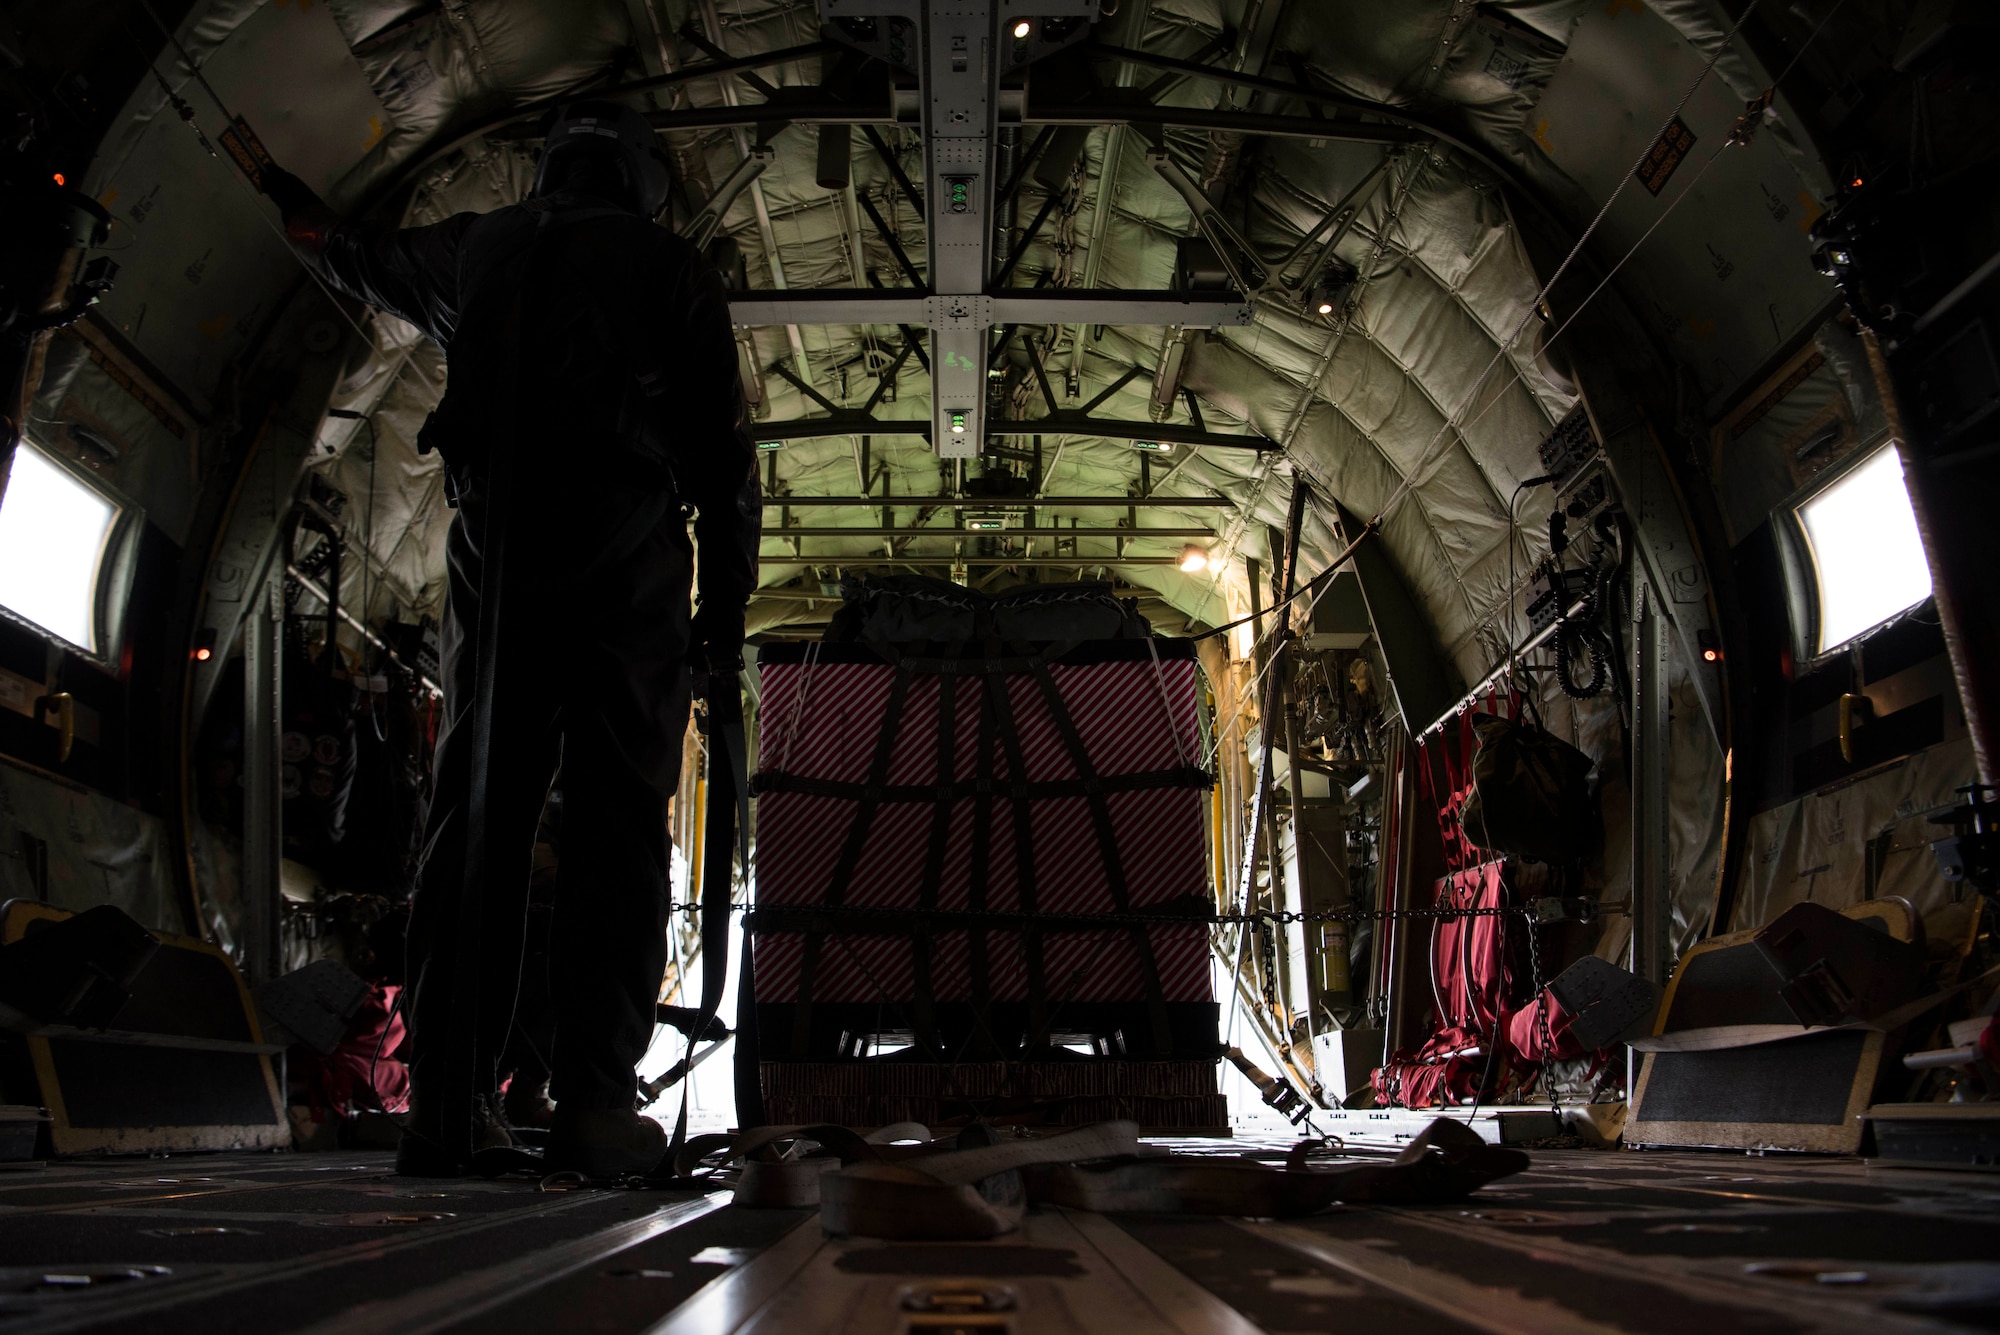 U.S. Air Force Staff Sgt. Kellan Hyacinthe, 37th Airlift Squadron C-130J Super Hercules loadmaster, prepares cargo wrapped in Christmas wrapping paper to be dropped out the back of a U.S. Air Force C-130J for Operation Toy Drop 2017 over Alzey Drop Zone, Germany, Dec. 6, 2017. The operation was designed to improve interoperability with NATO allies. (U.S. Air Force photo by Senior Airman Devin M. Rumbaugh)